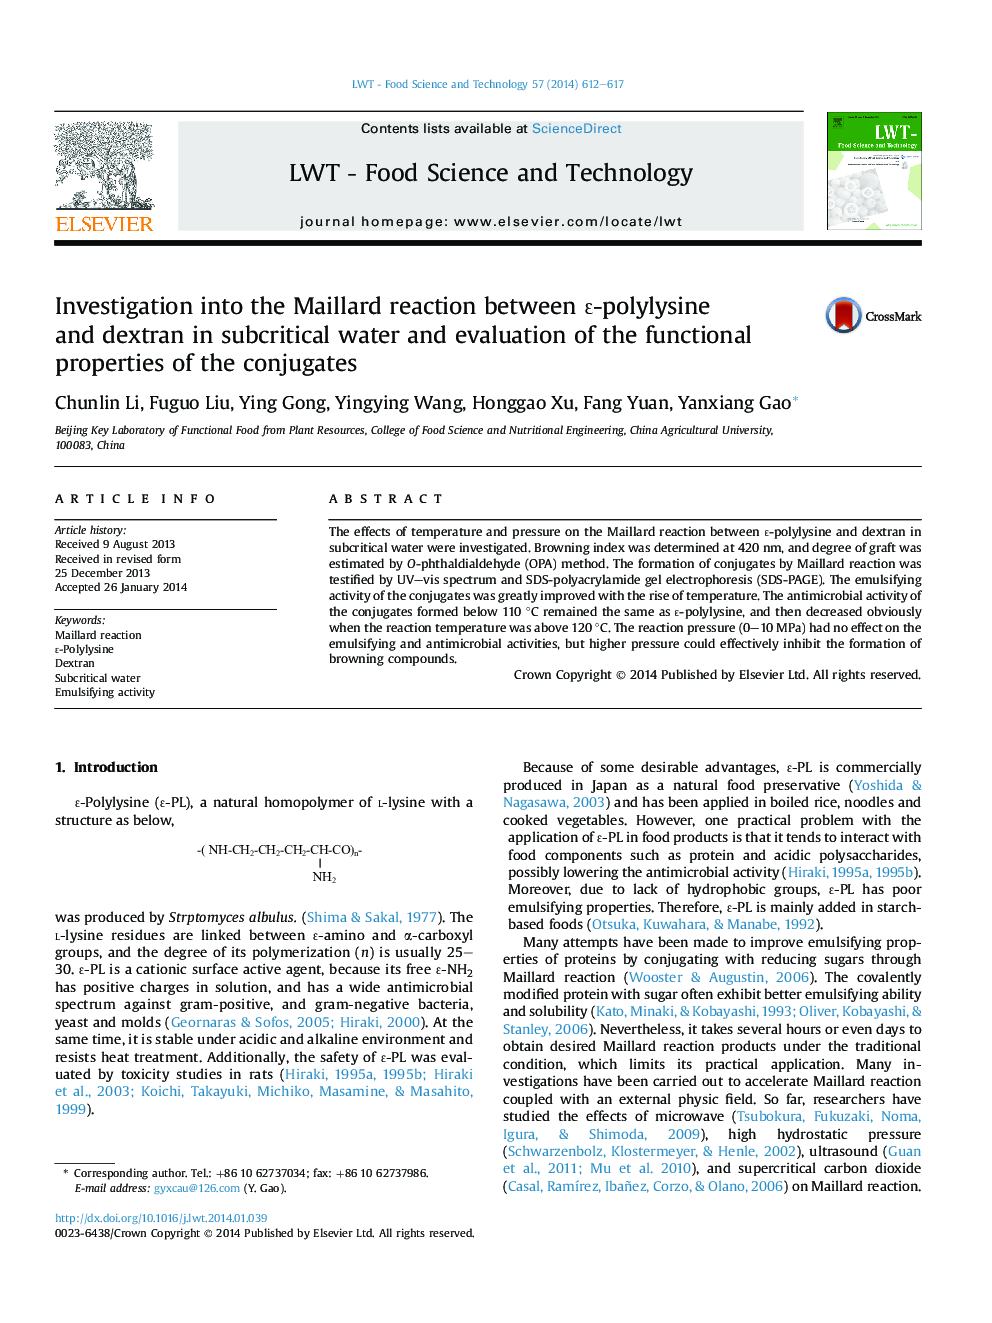 Investigation into the Maillard reaction between É-polylysine and dextran in subcritical water and evaluation of the functional properties of the conjugates